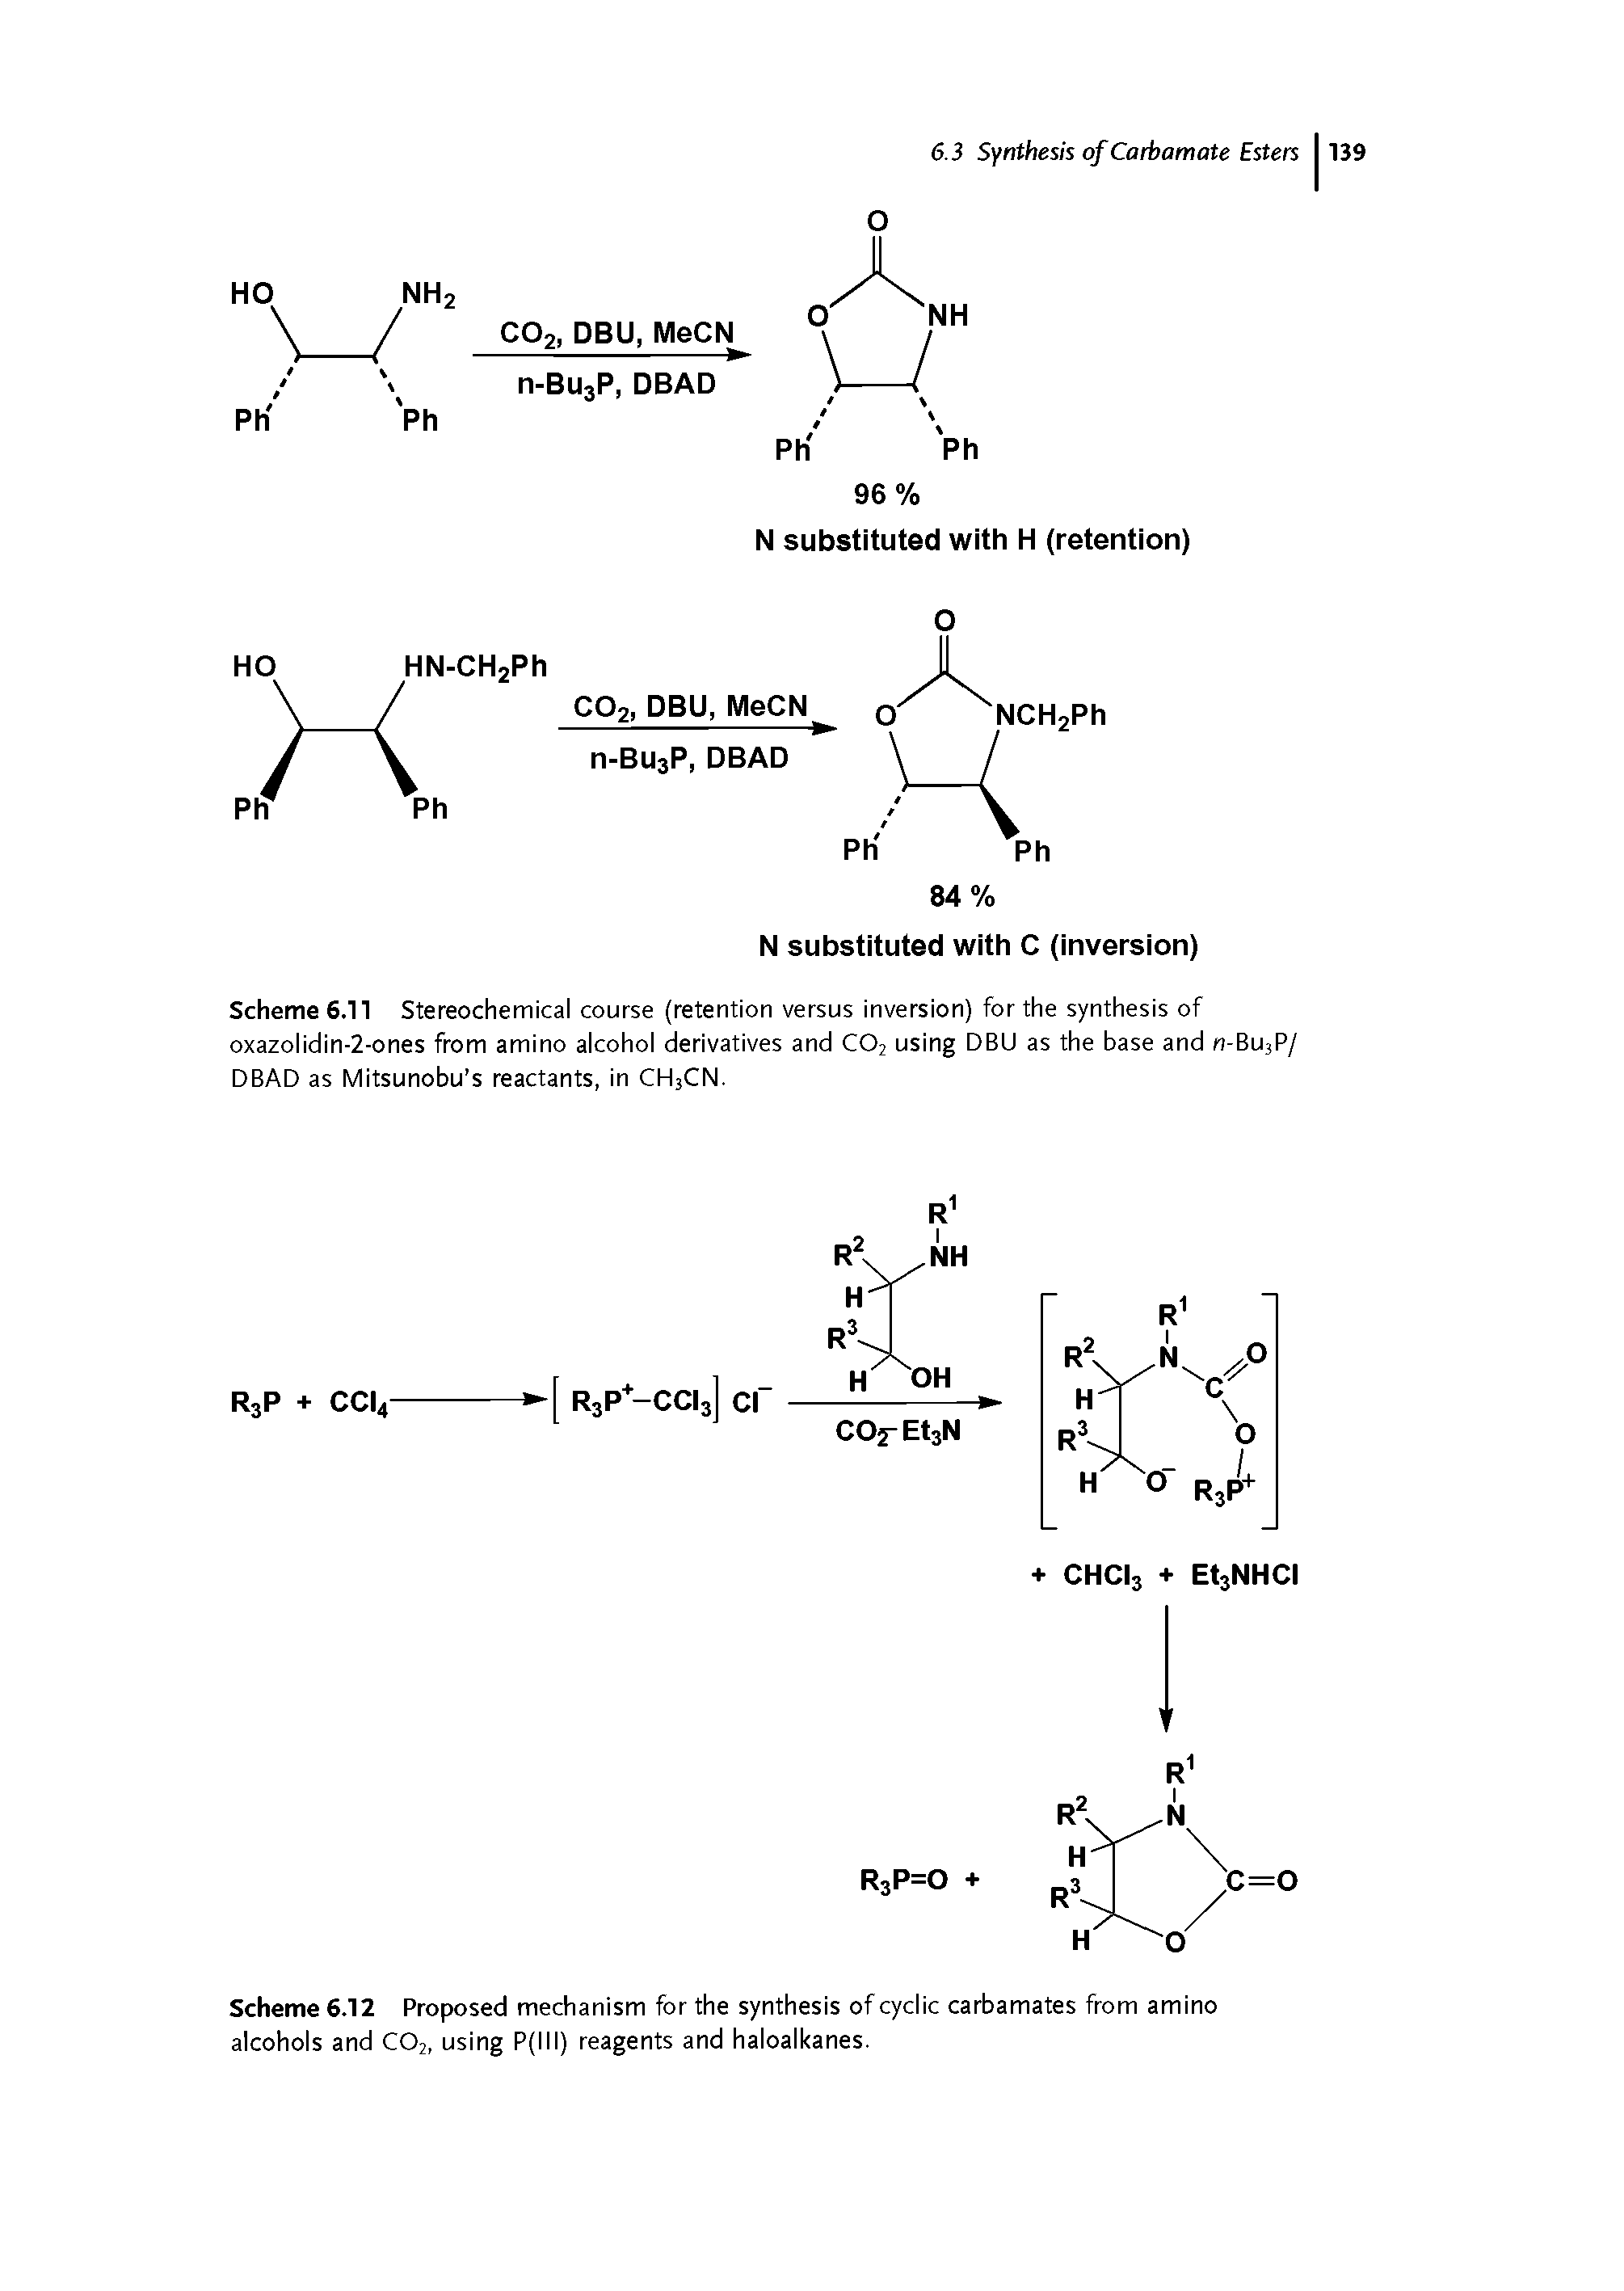 Scheme 6.12 Proposed mechanism for the synthesis of cyclic carbamates from amino alcohols and C02, using P(lll) reagents and haloalkanes.